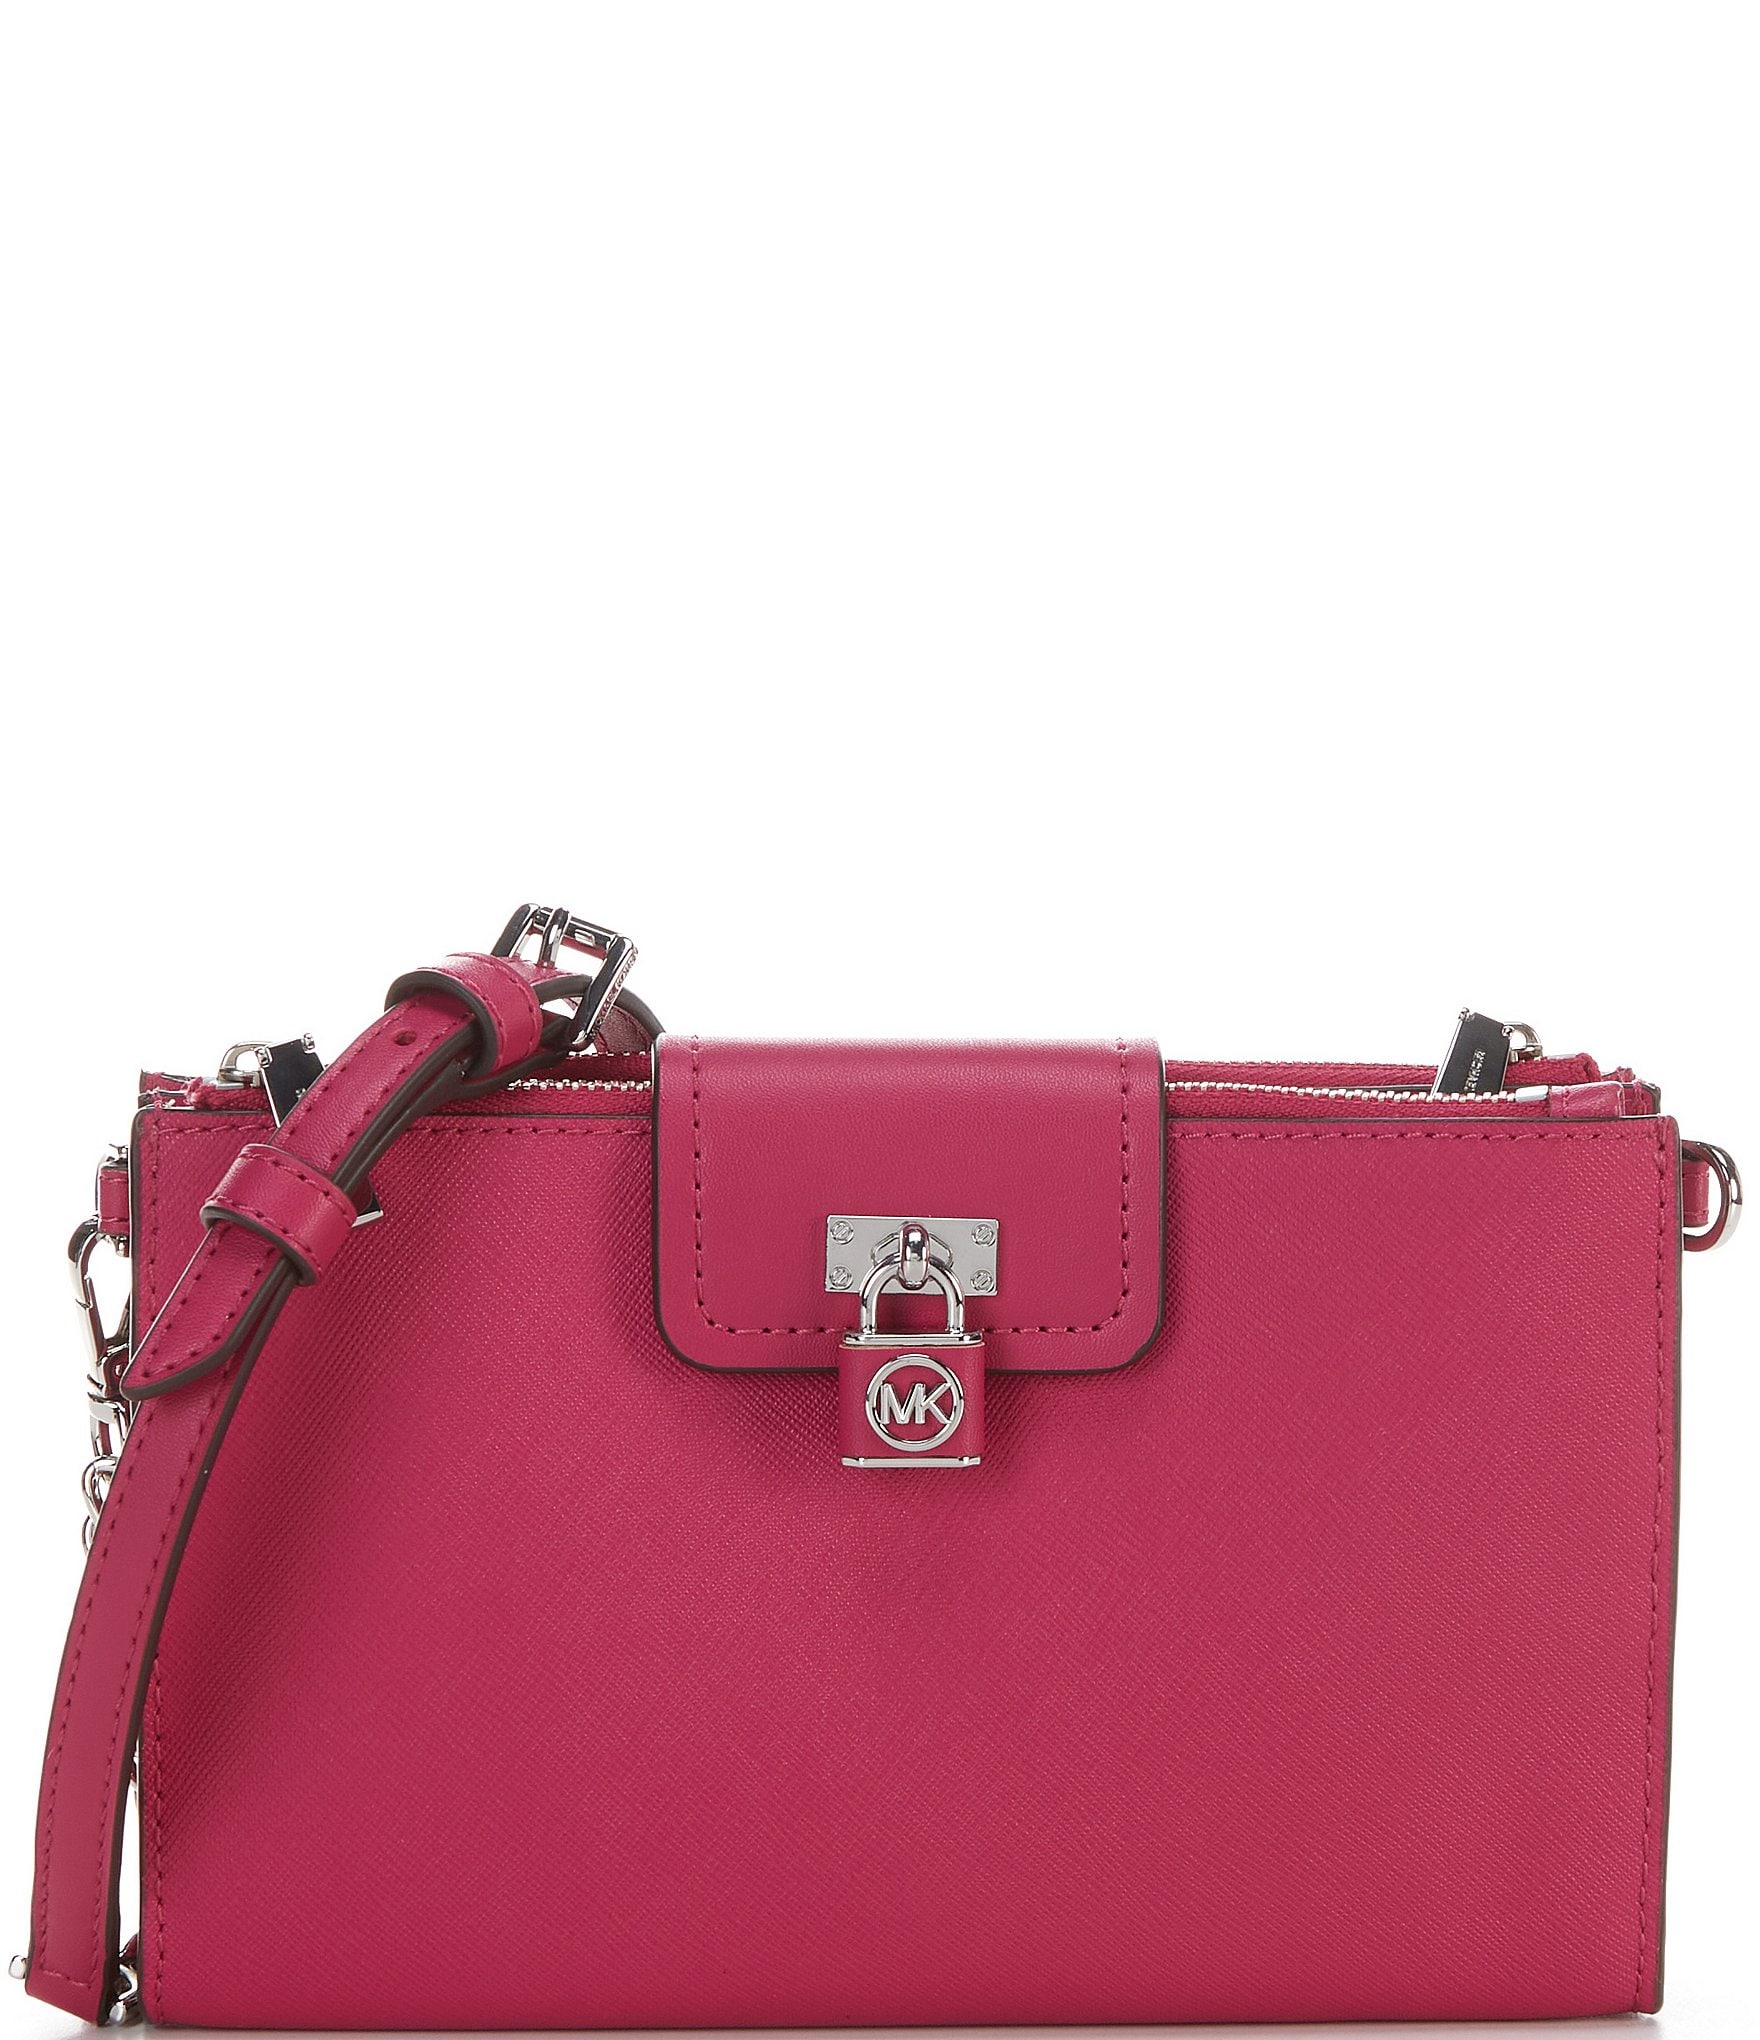 Buy Michael Kors Ruby Small Saffiano Leather Satchel